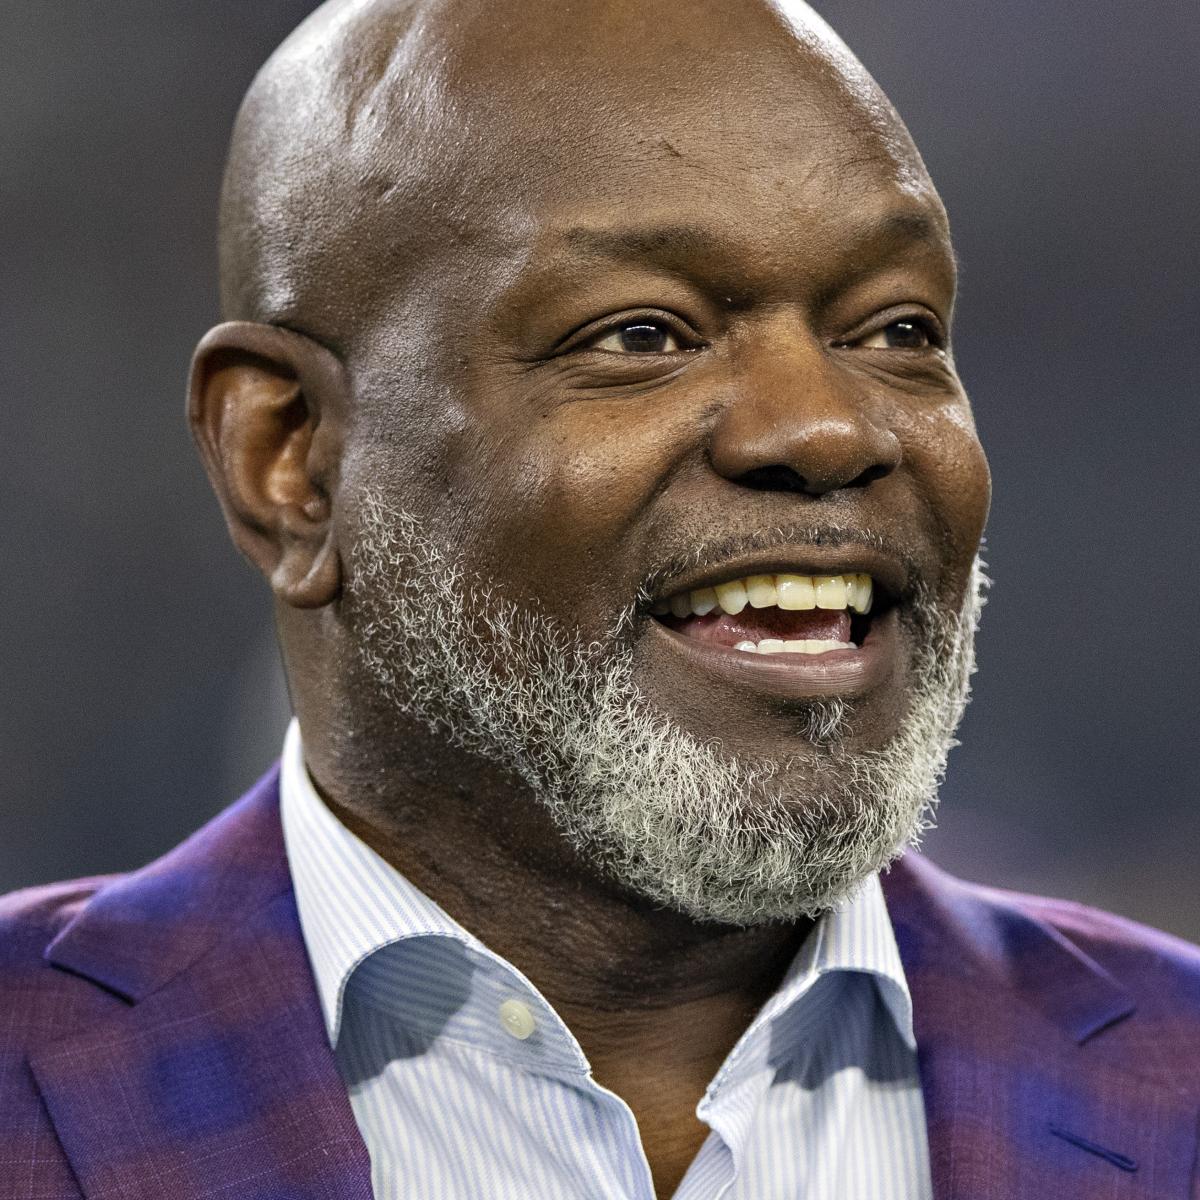 Cowboys Account Emmitt Smith to Steal Allotment in Virtual Rally Against Racism